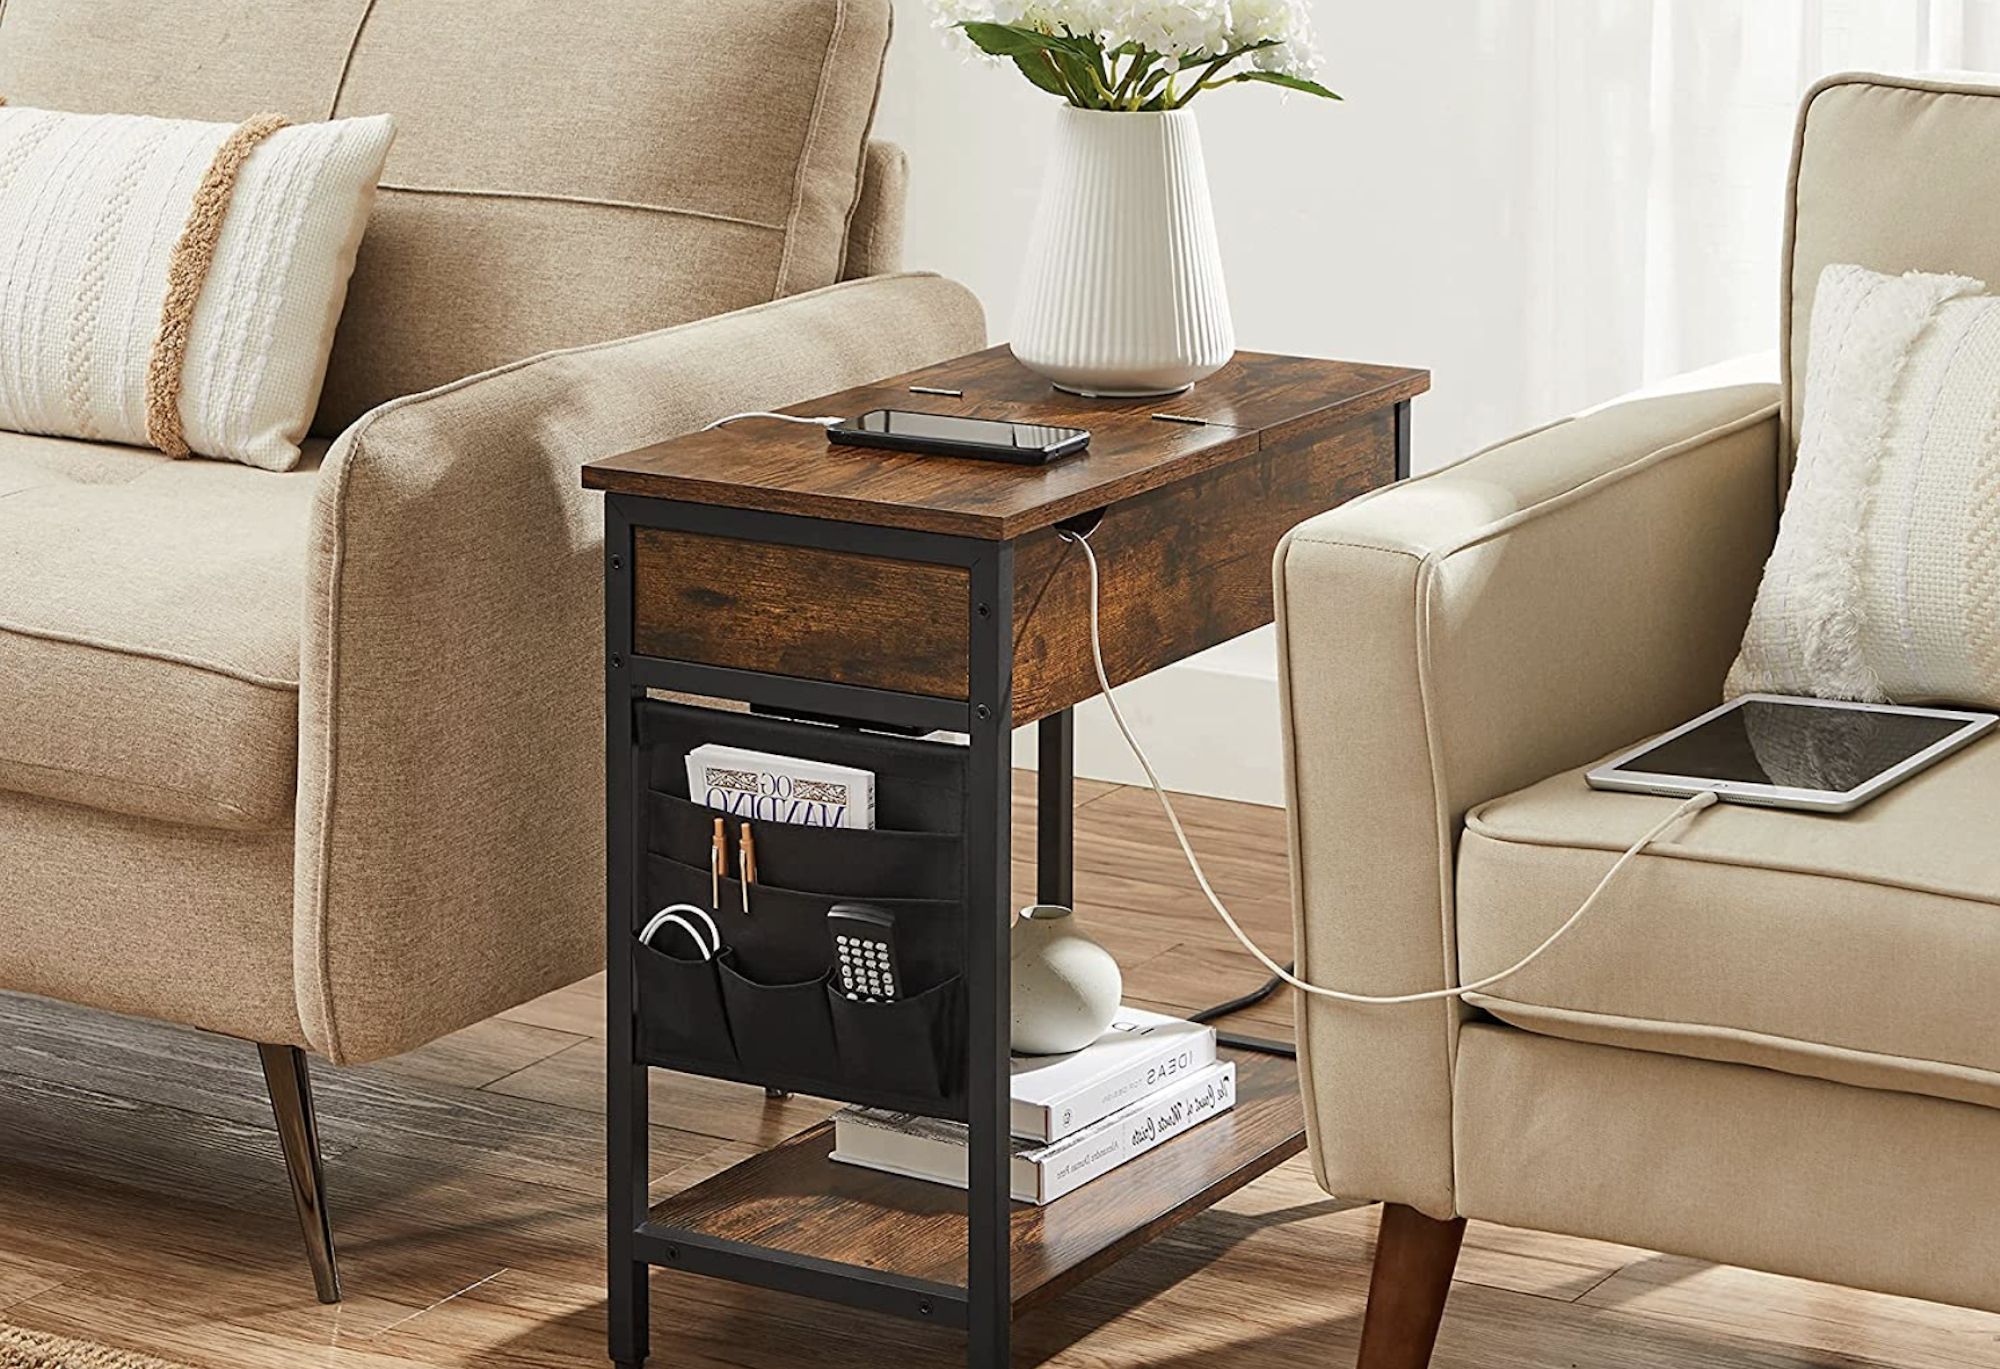 [%current Coffee Tables With Charging Station Pertaining To Night Table With Charging Station Shop Deals, 47% Off | Lahuelladigital|night Table With Charging Station Shop Deals, 47% Off | Lahuelladigital With Well Liked Coffee Tables With Charging Station%] (View 4 of 20)